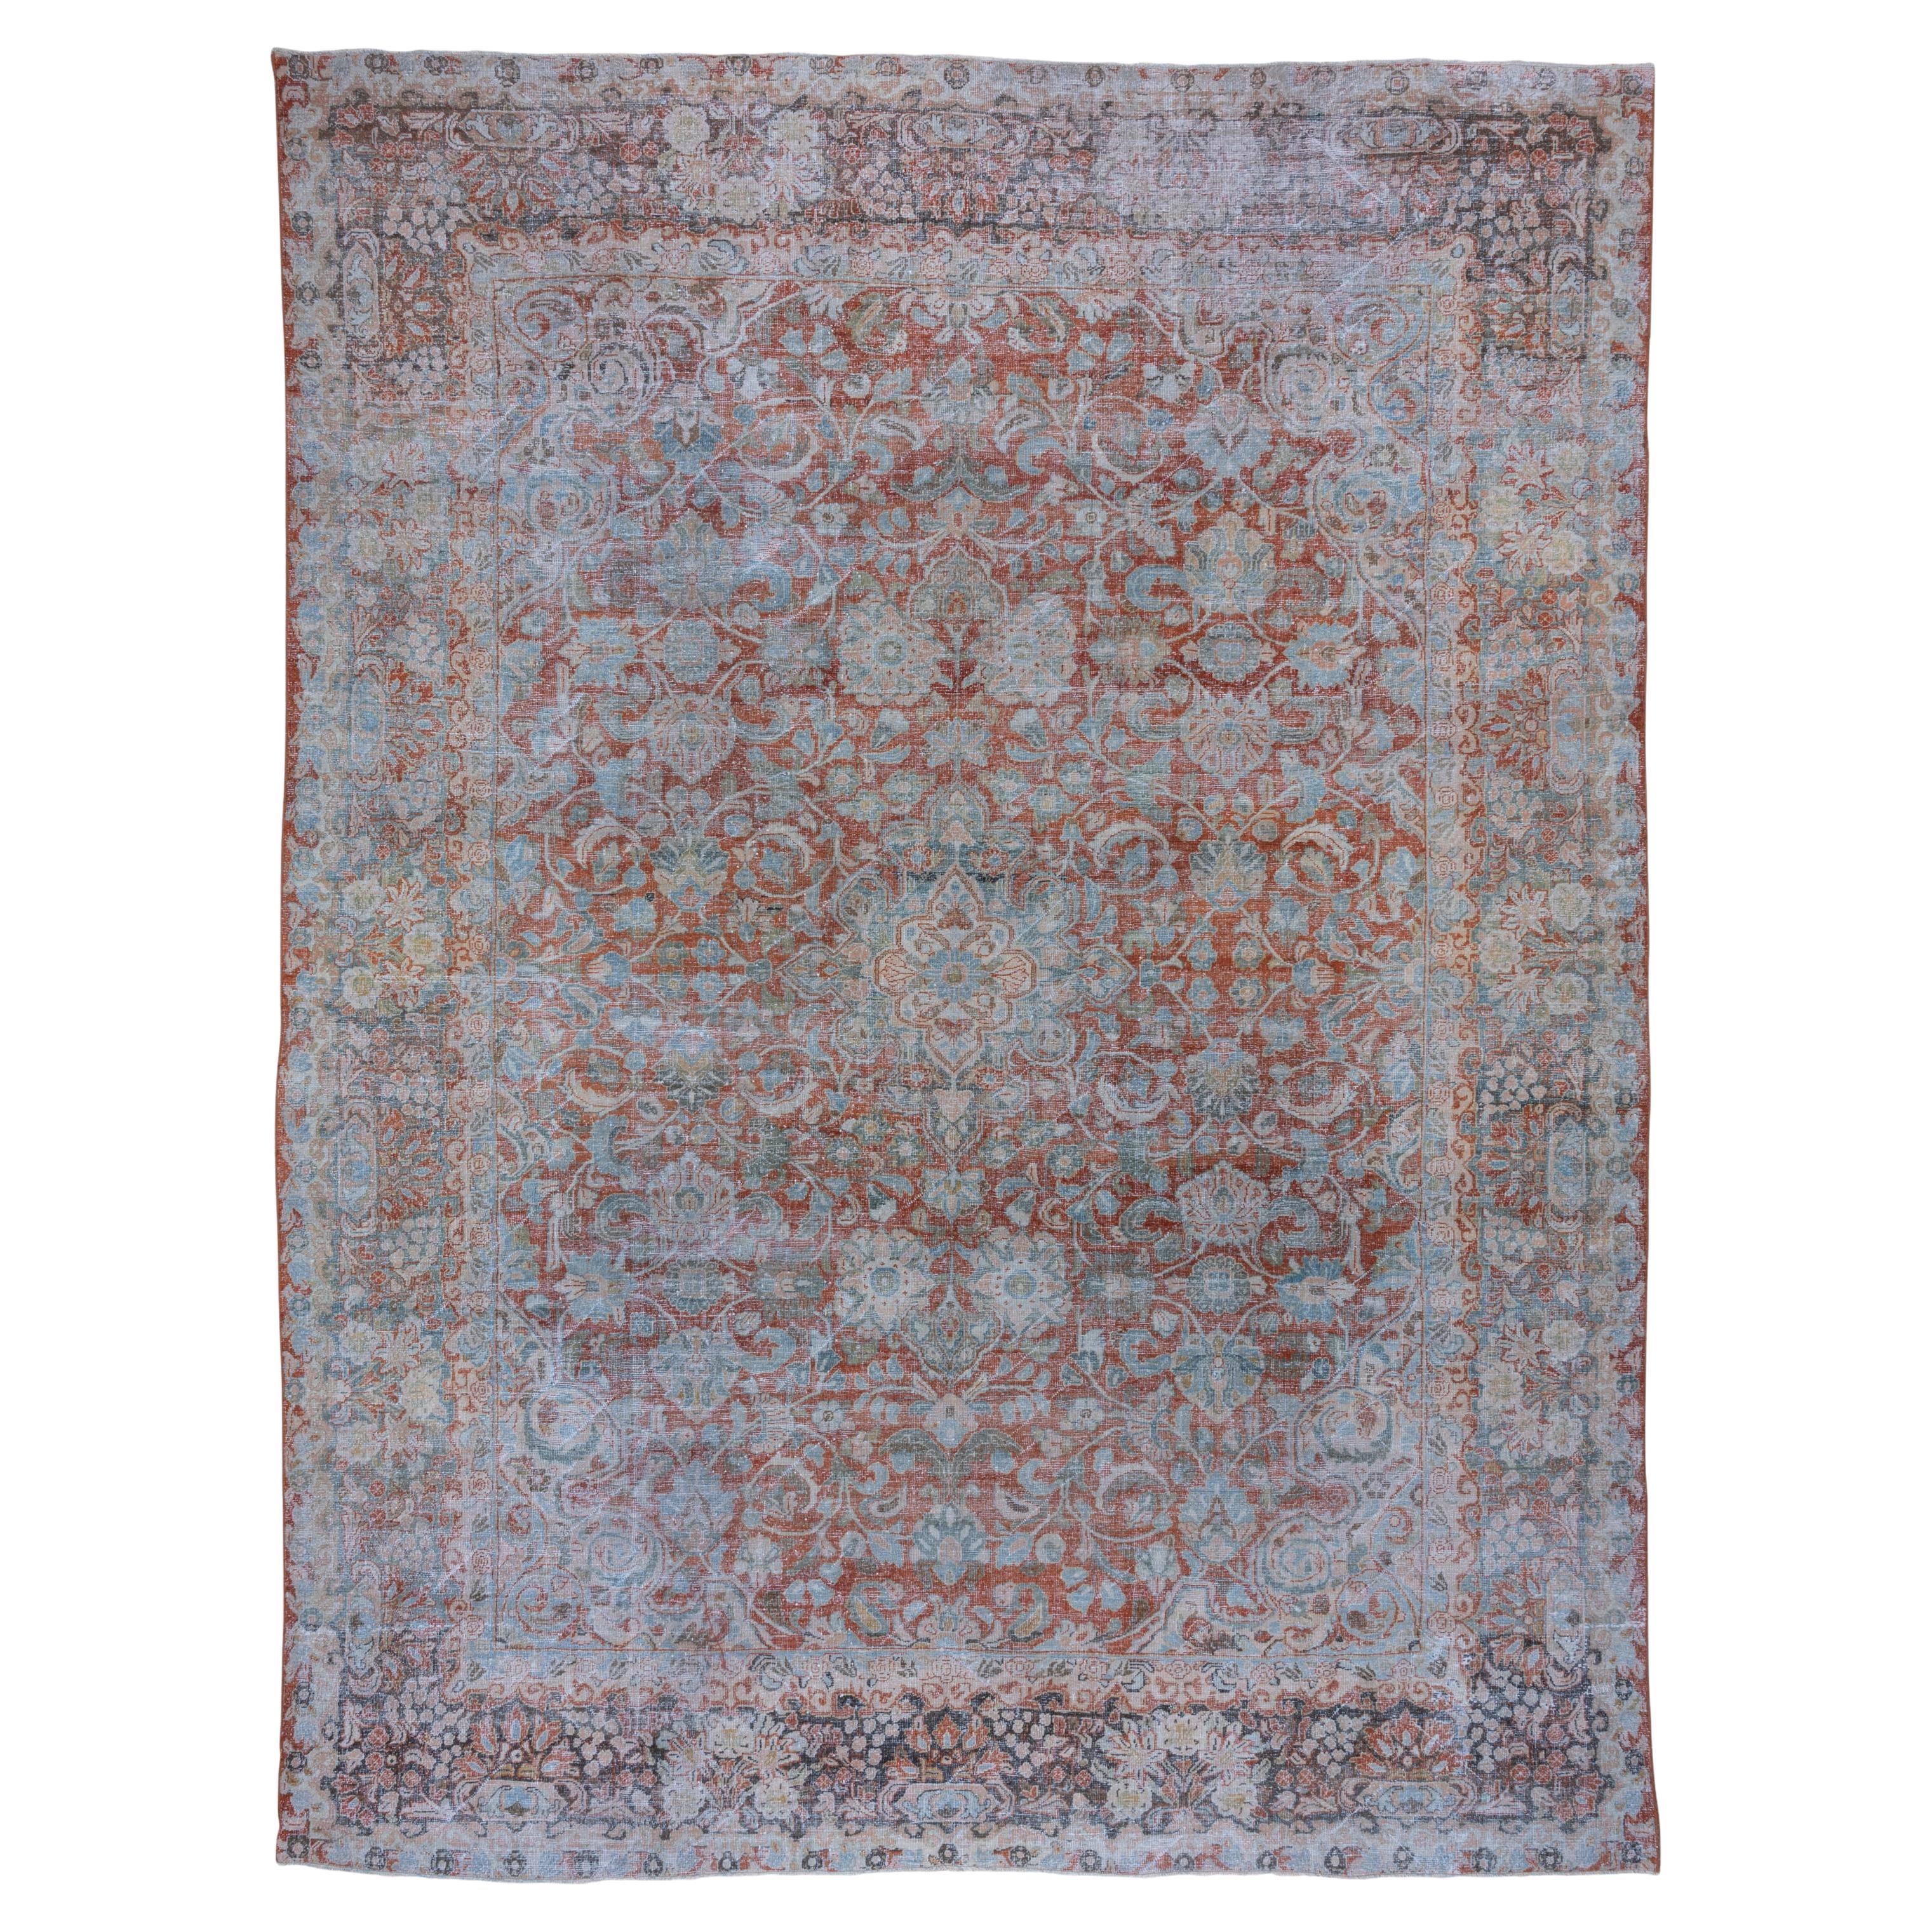 Antique Distressed Red Persian Mahal Carpet, All-Over Field, Blue Accents For Sale